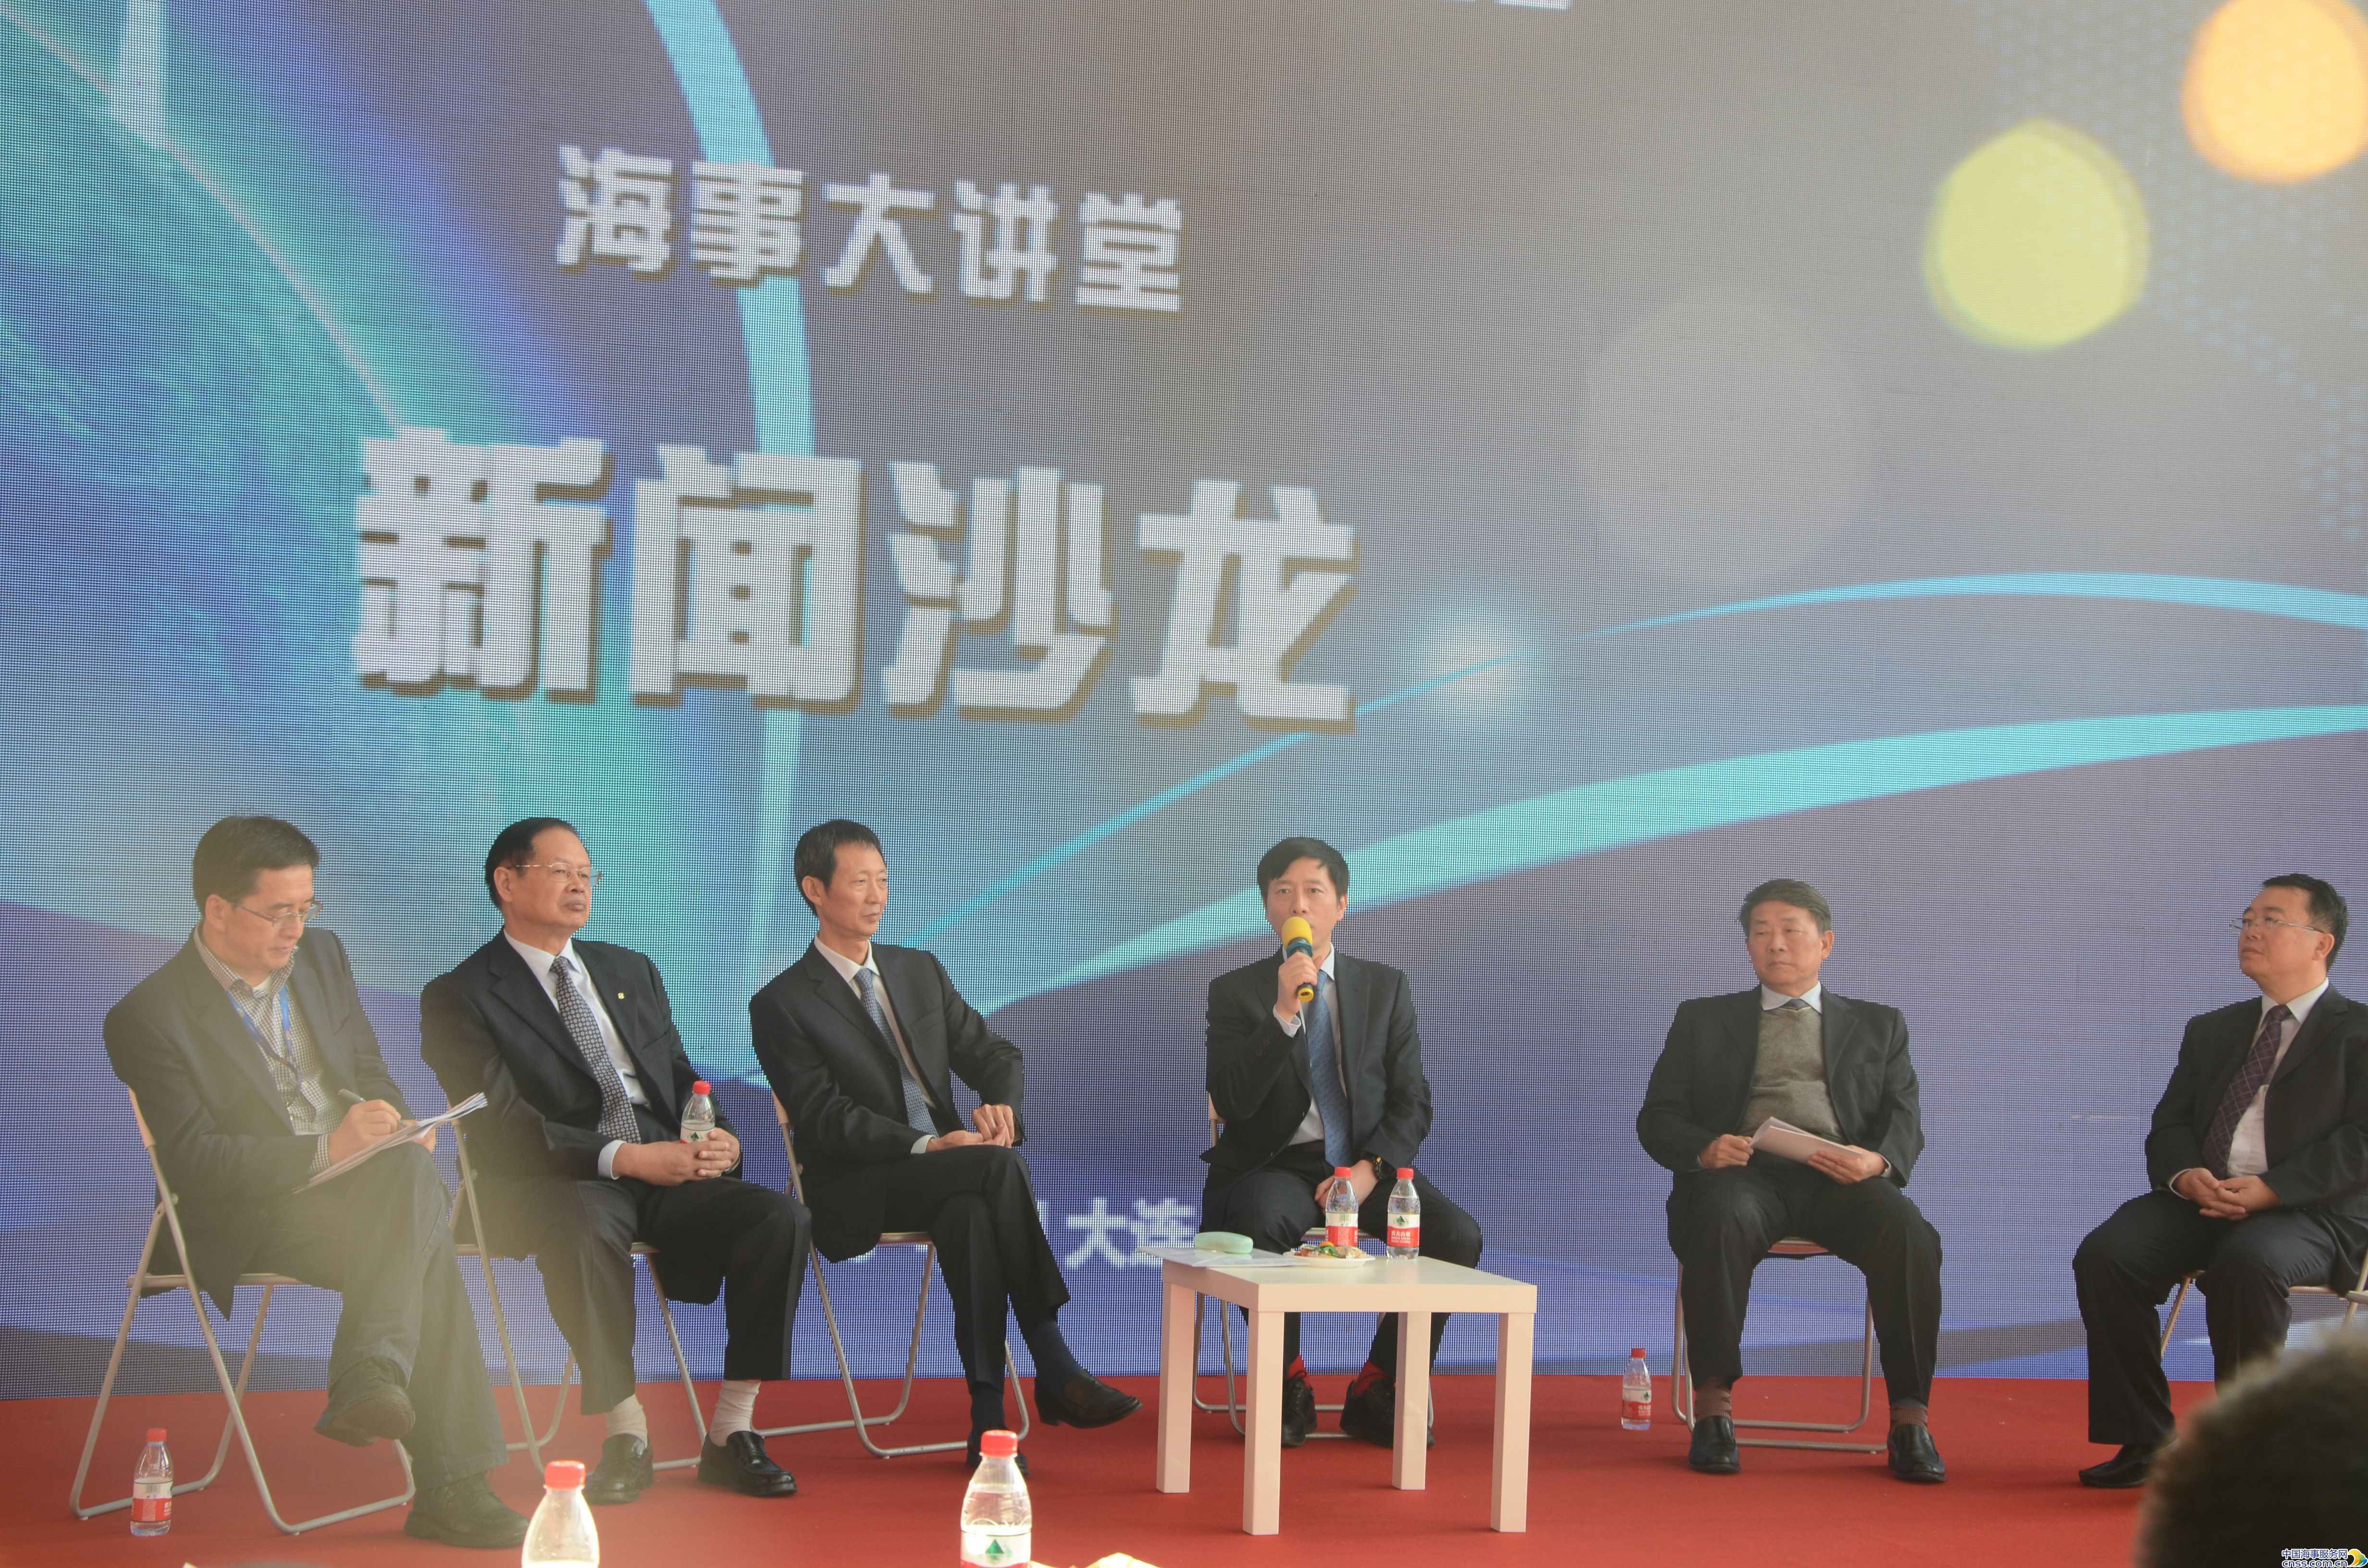 Chen Yingtao：“White List”Shipyards will enter into a new management pattern